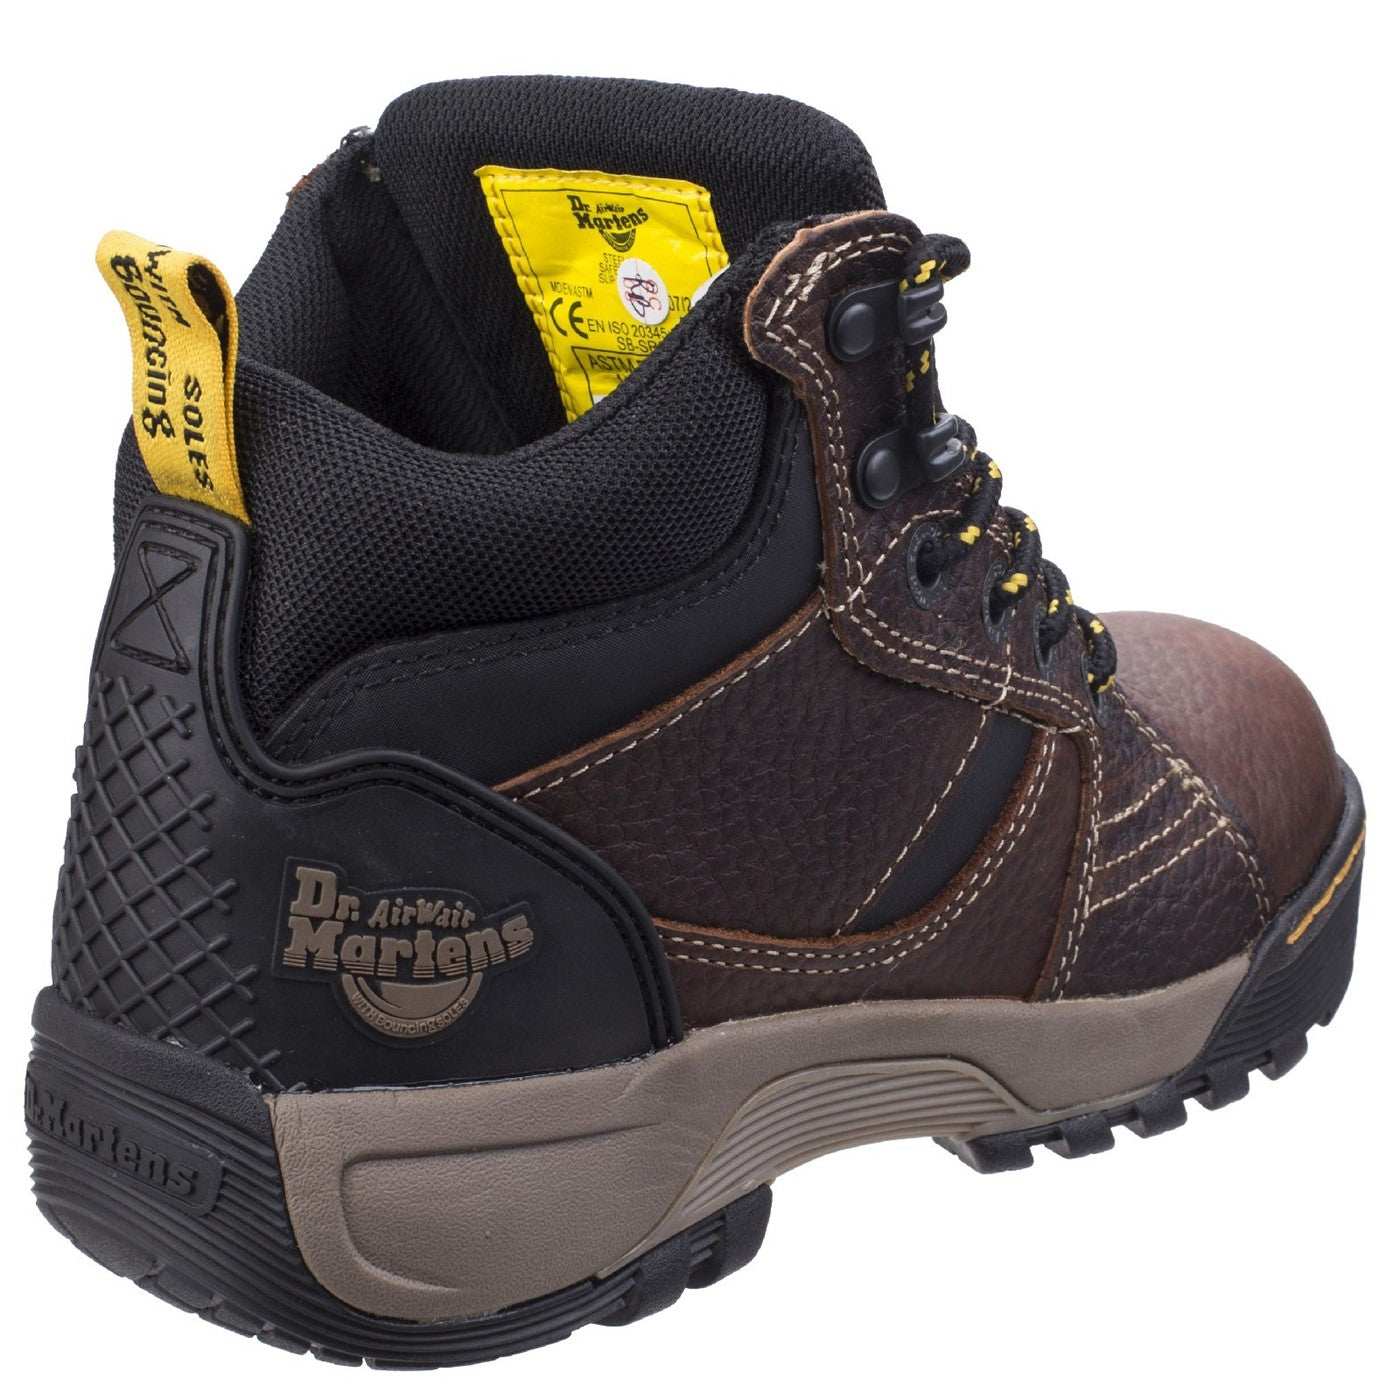 Unisex Dr Martens Grapple Mens Safety Boot